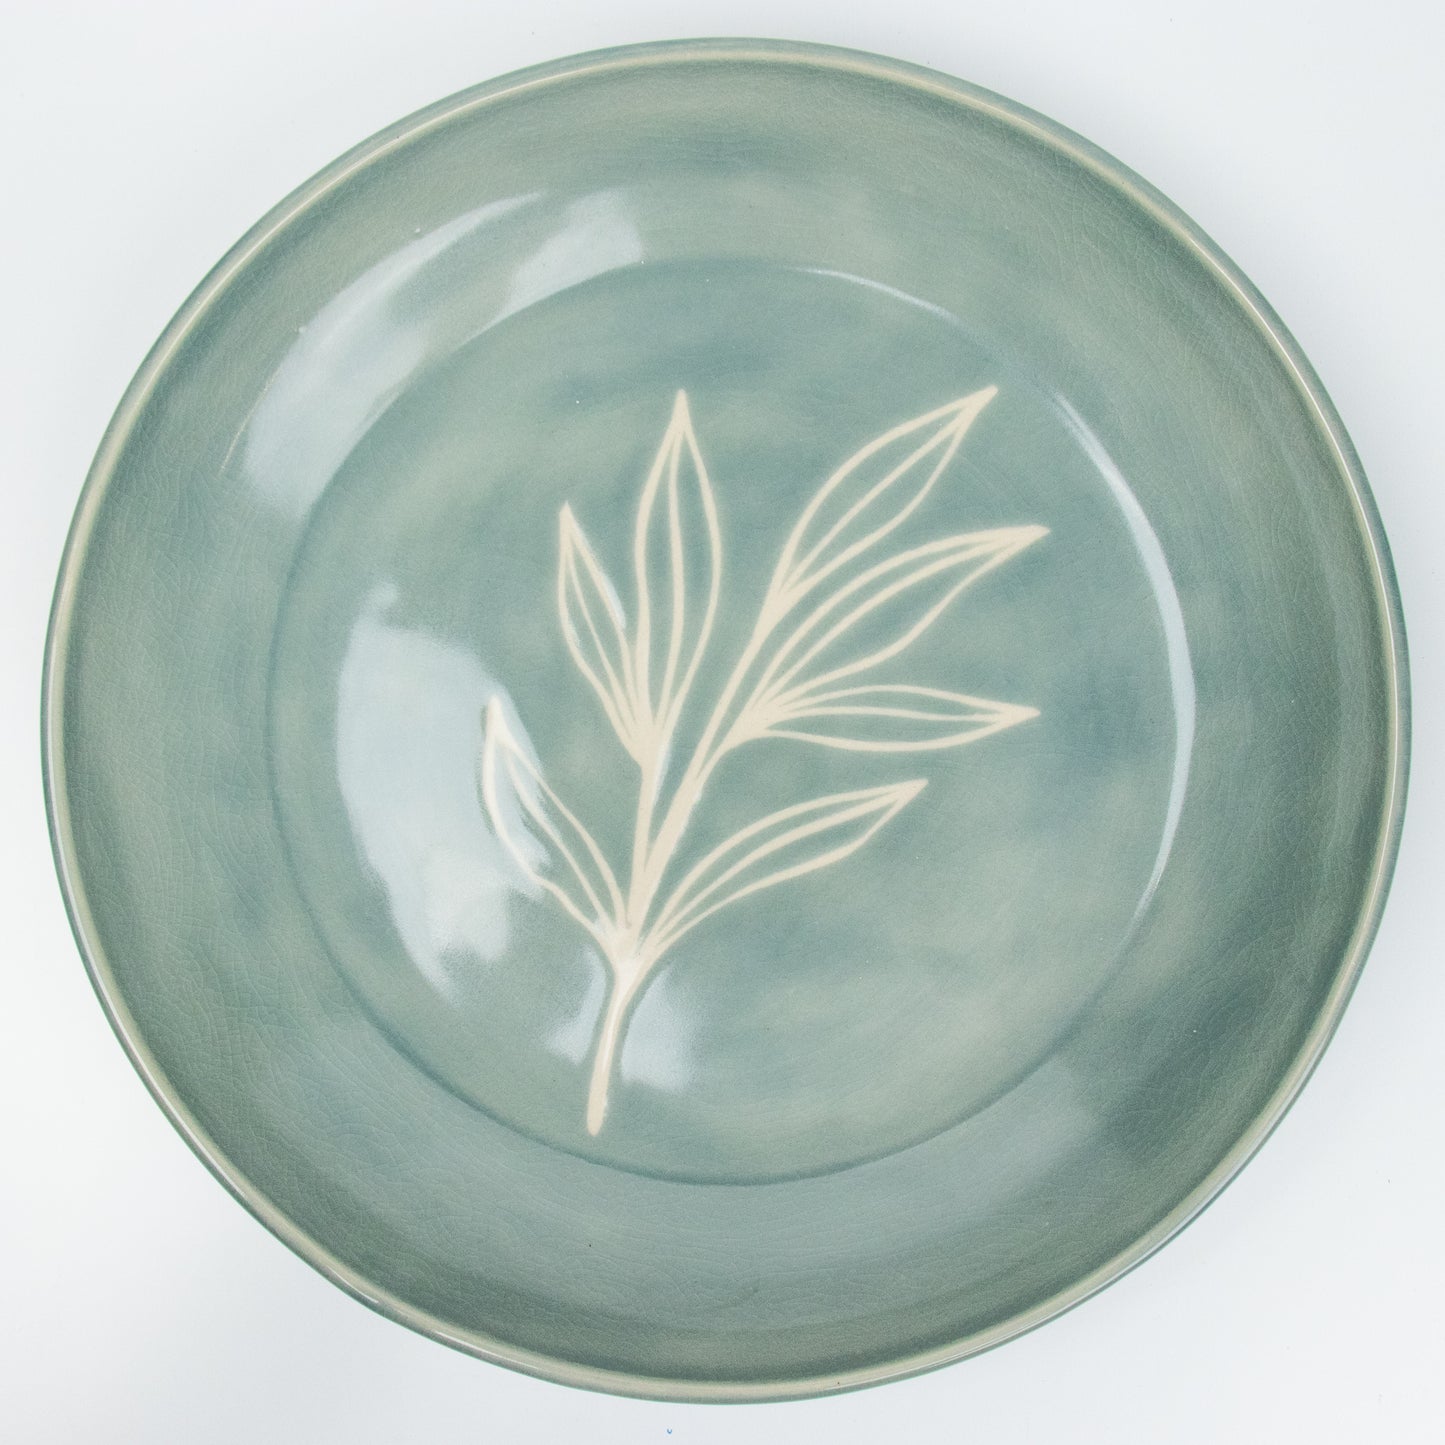 Turquoise Serving Plate with White Leaf